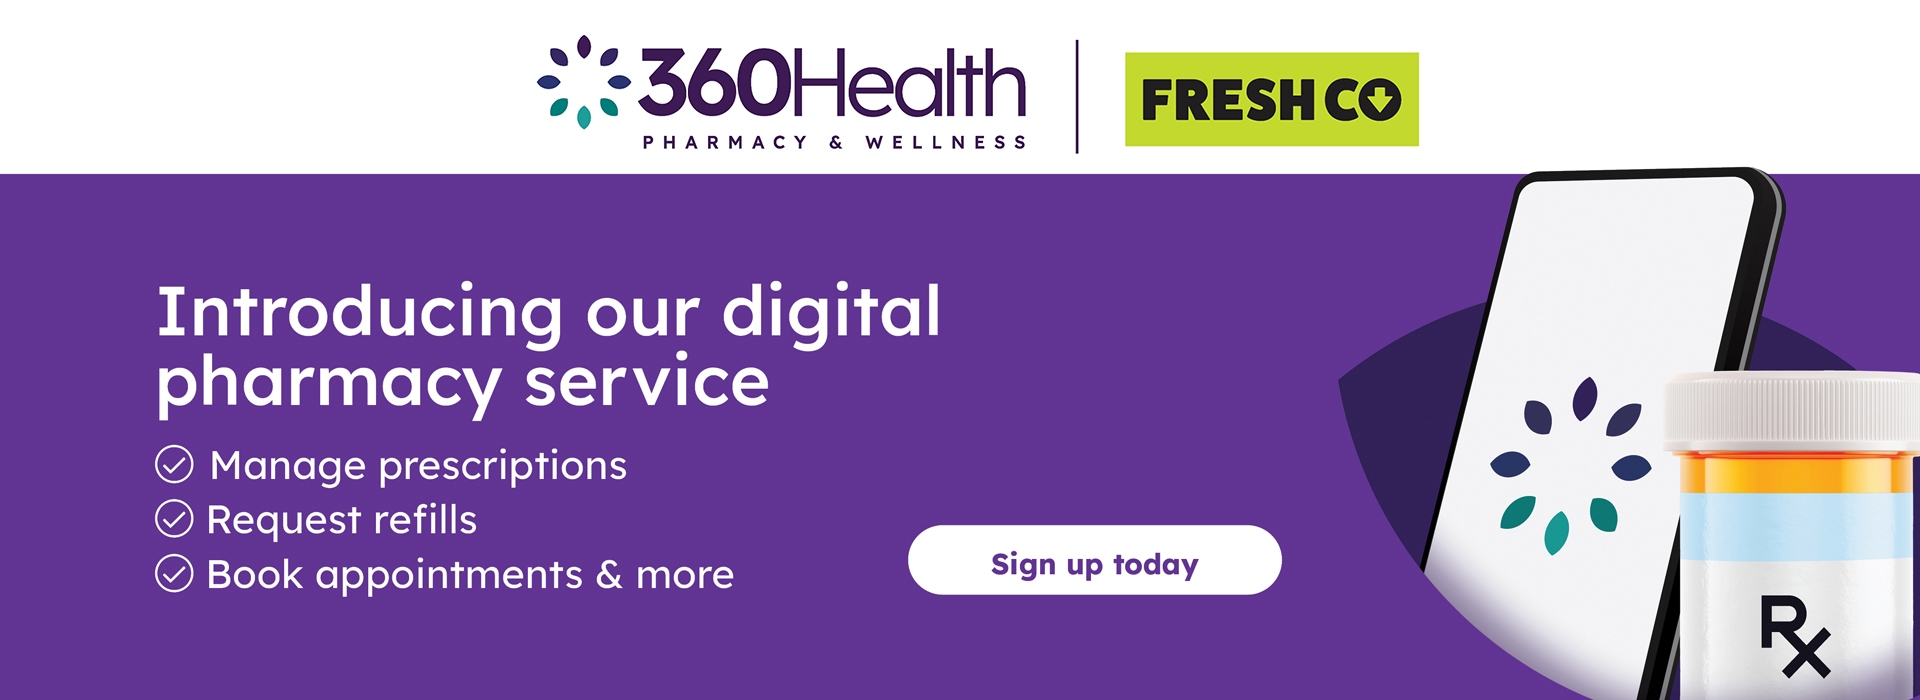 Introducing our new digital pharmacy service